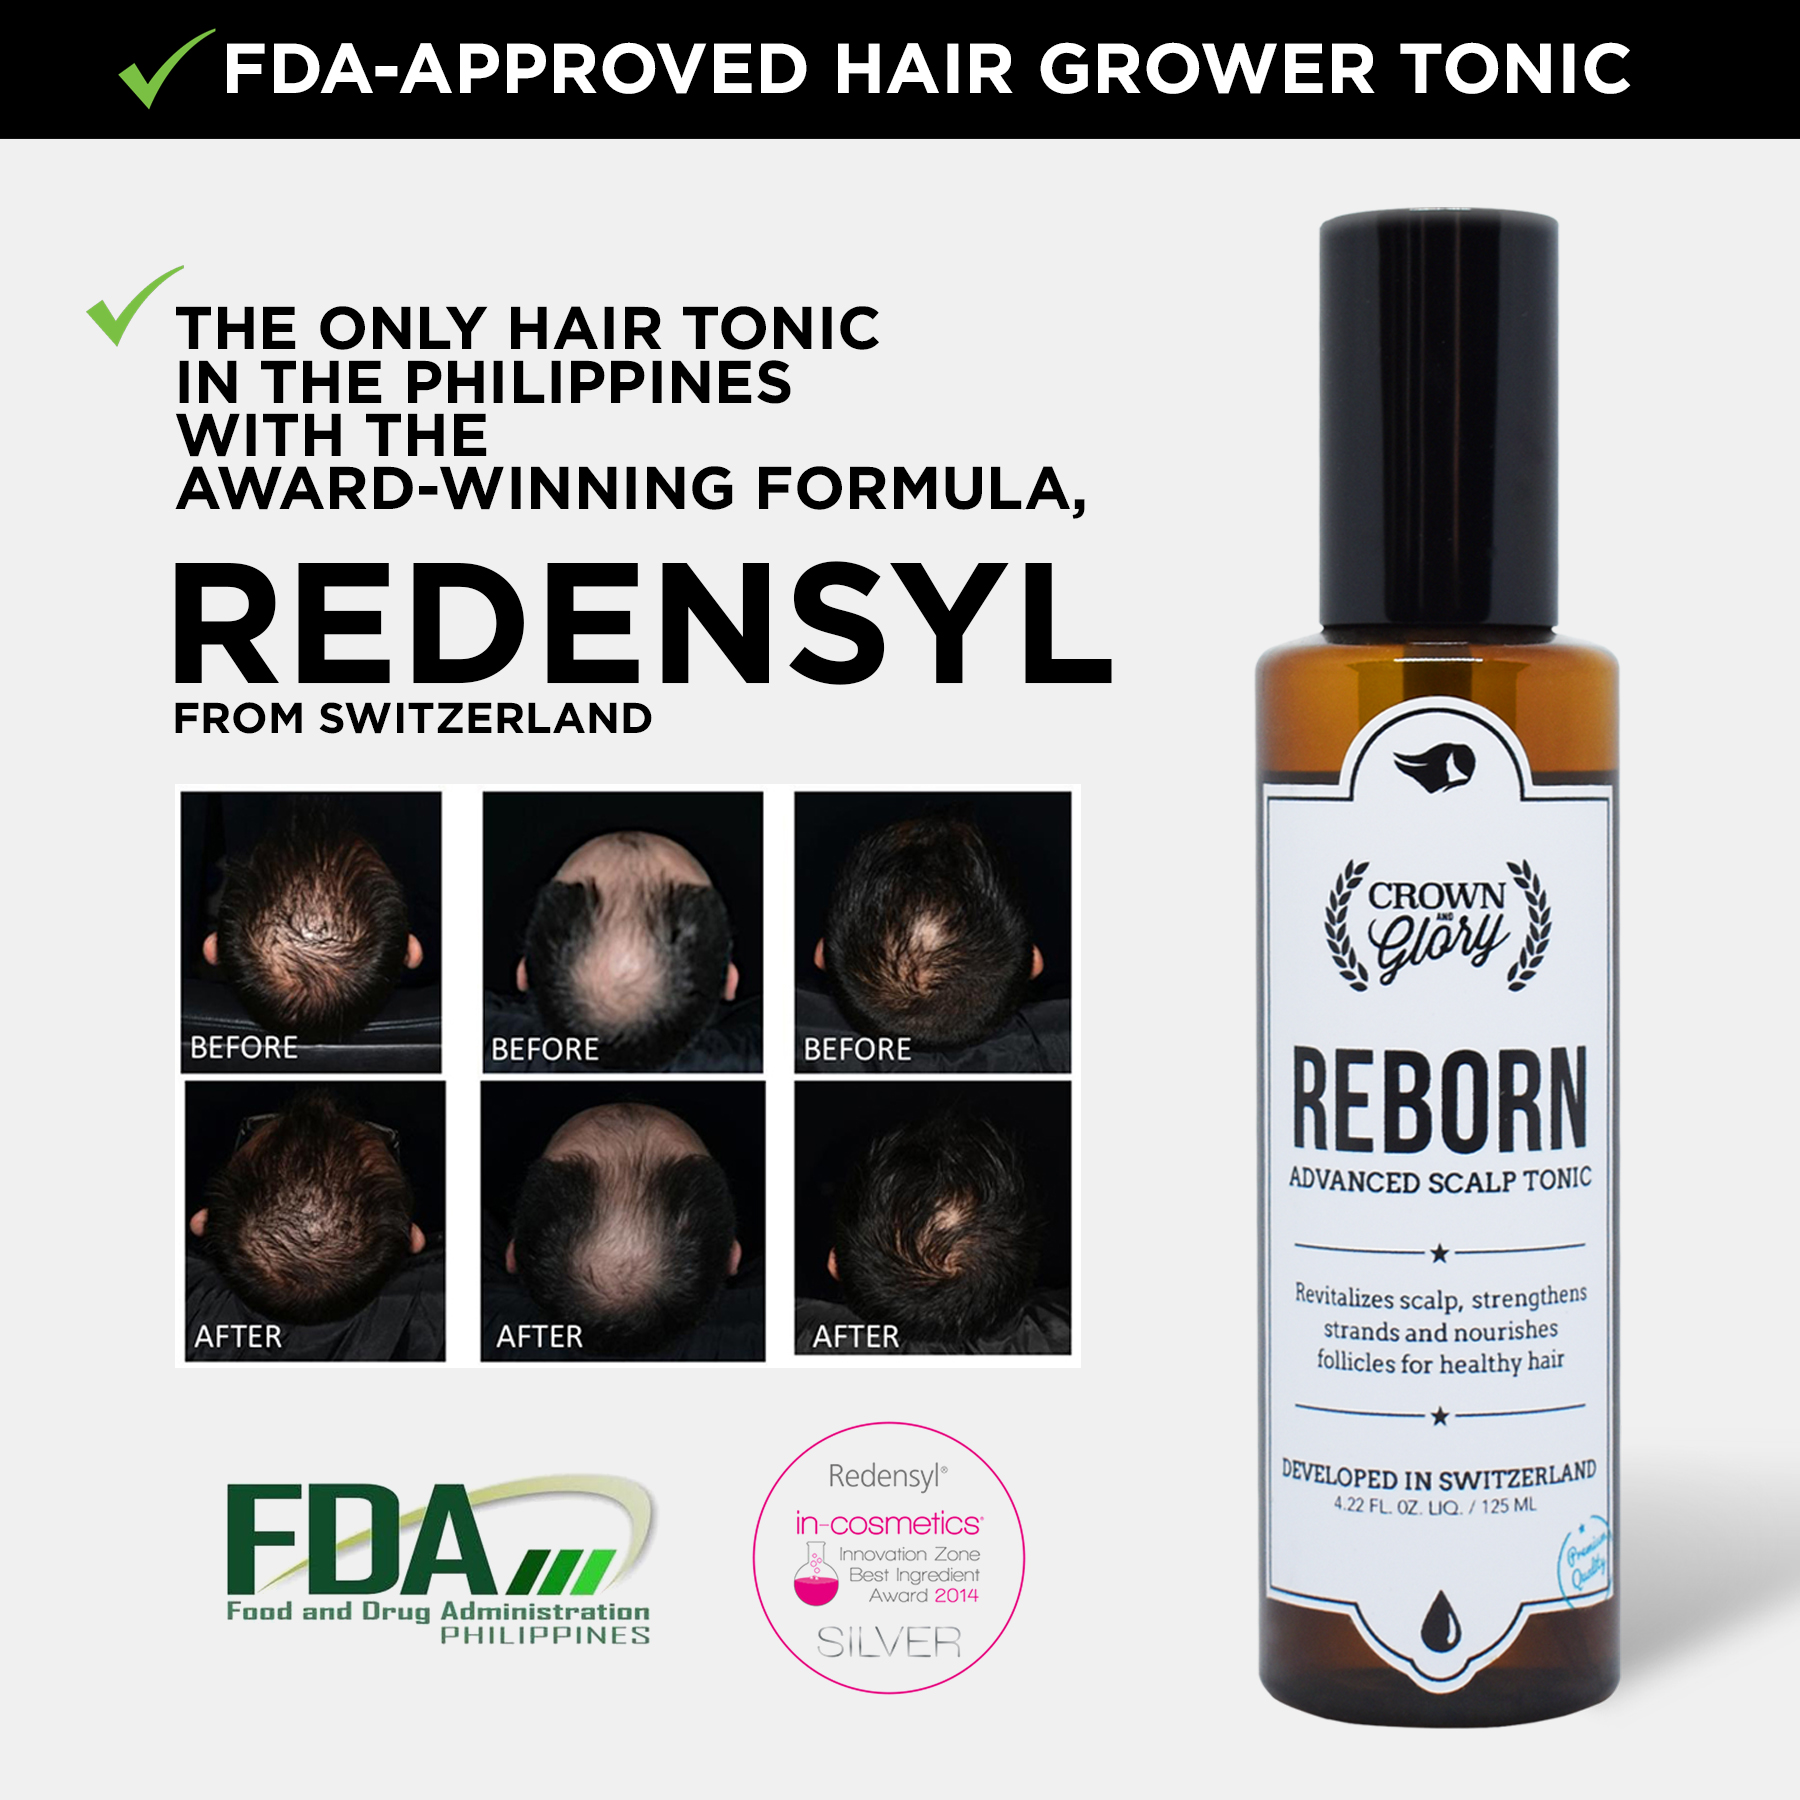 Crown & Glory Reborn Advanced Scalp Tonic with Redensyl® 125mL, Save  PHP451! - turbo boosts hair growth | Lazada PH